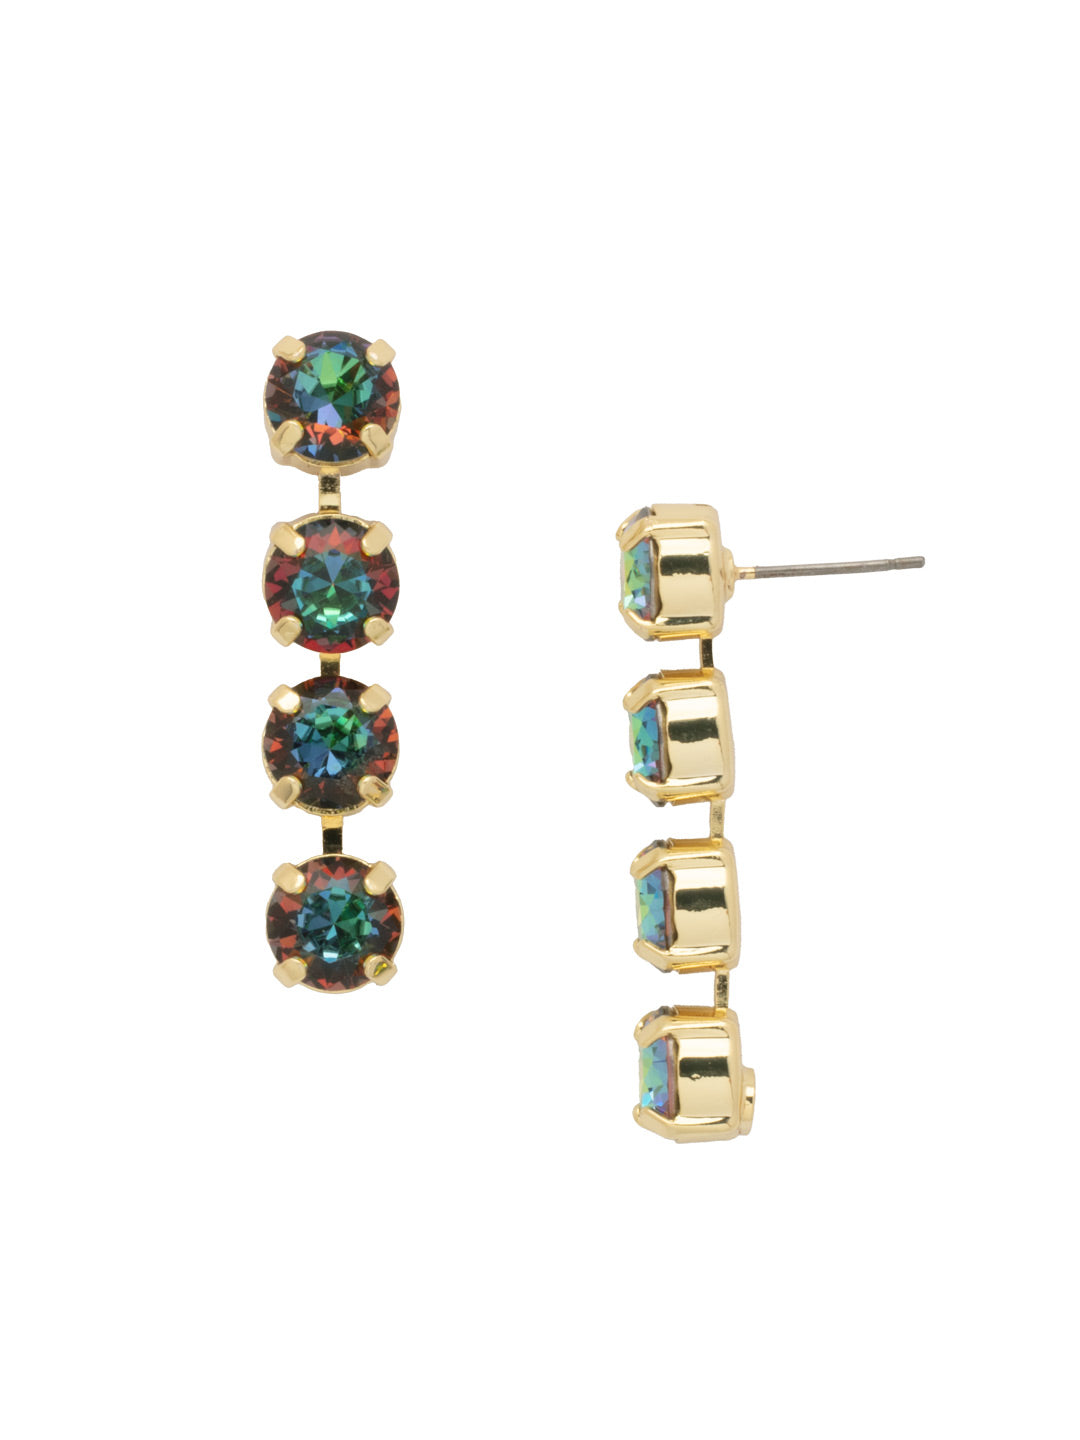 Matilda Dangle Earrings - EFH1BGVO - <p>The Matilda Dangle Earrings feature a row of 4 round cut crystals on a post. From Sorrelli's Volcano collection in our Bright Gold-tone finish.</p>